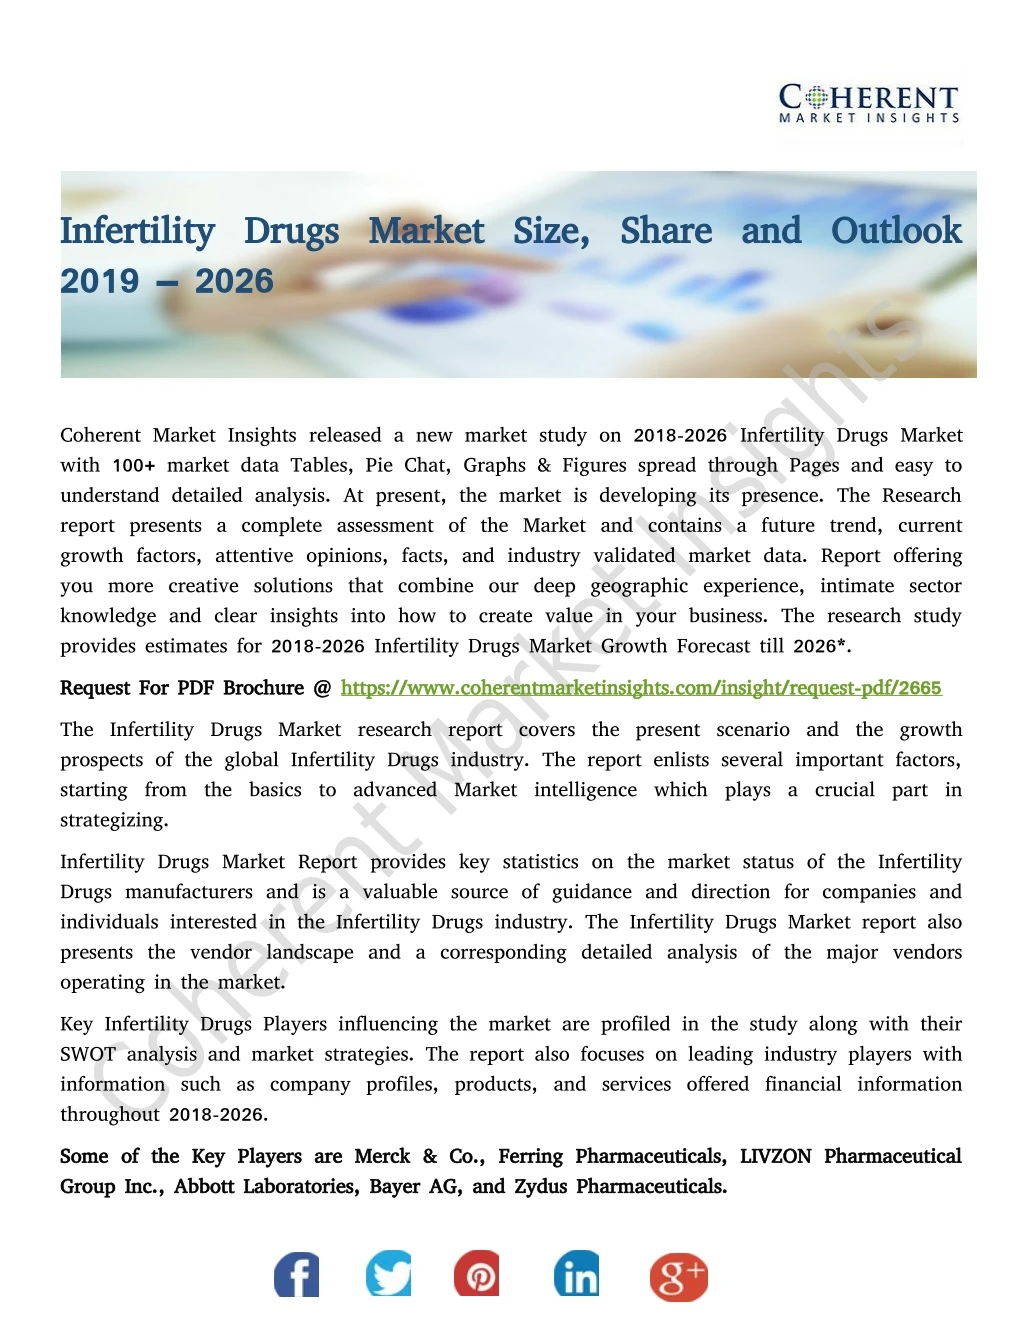 infertility drugs market size share and outlook